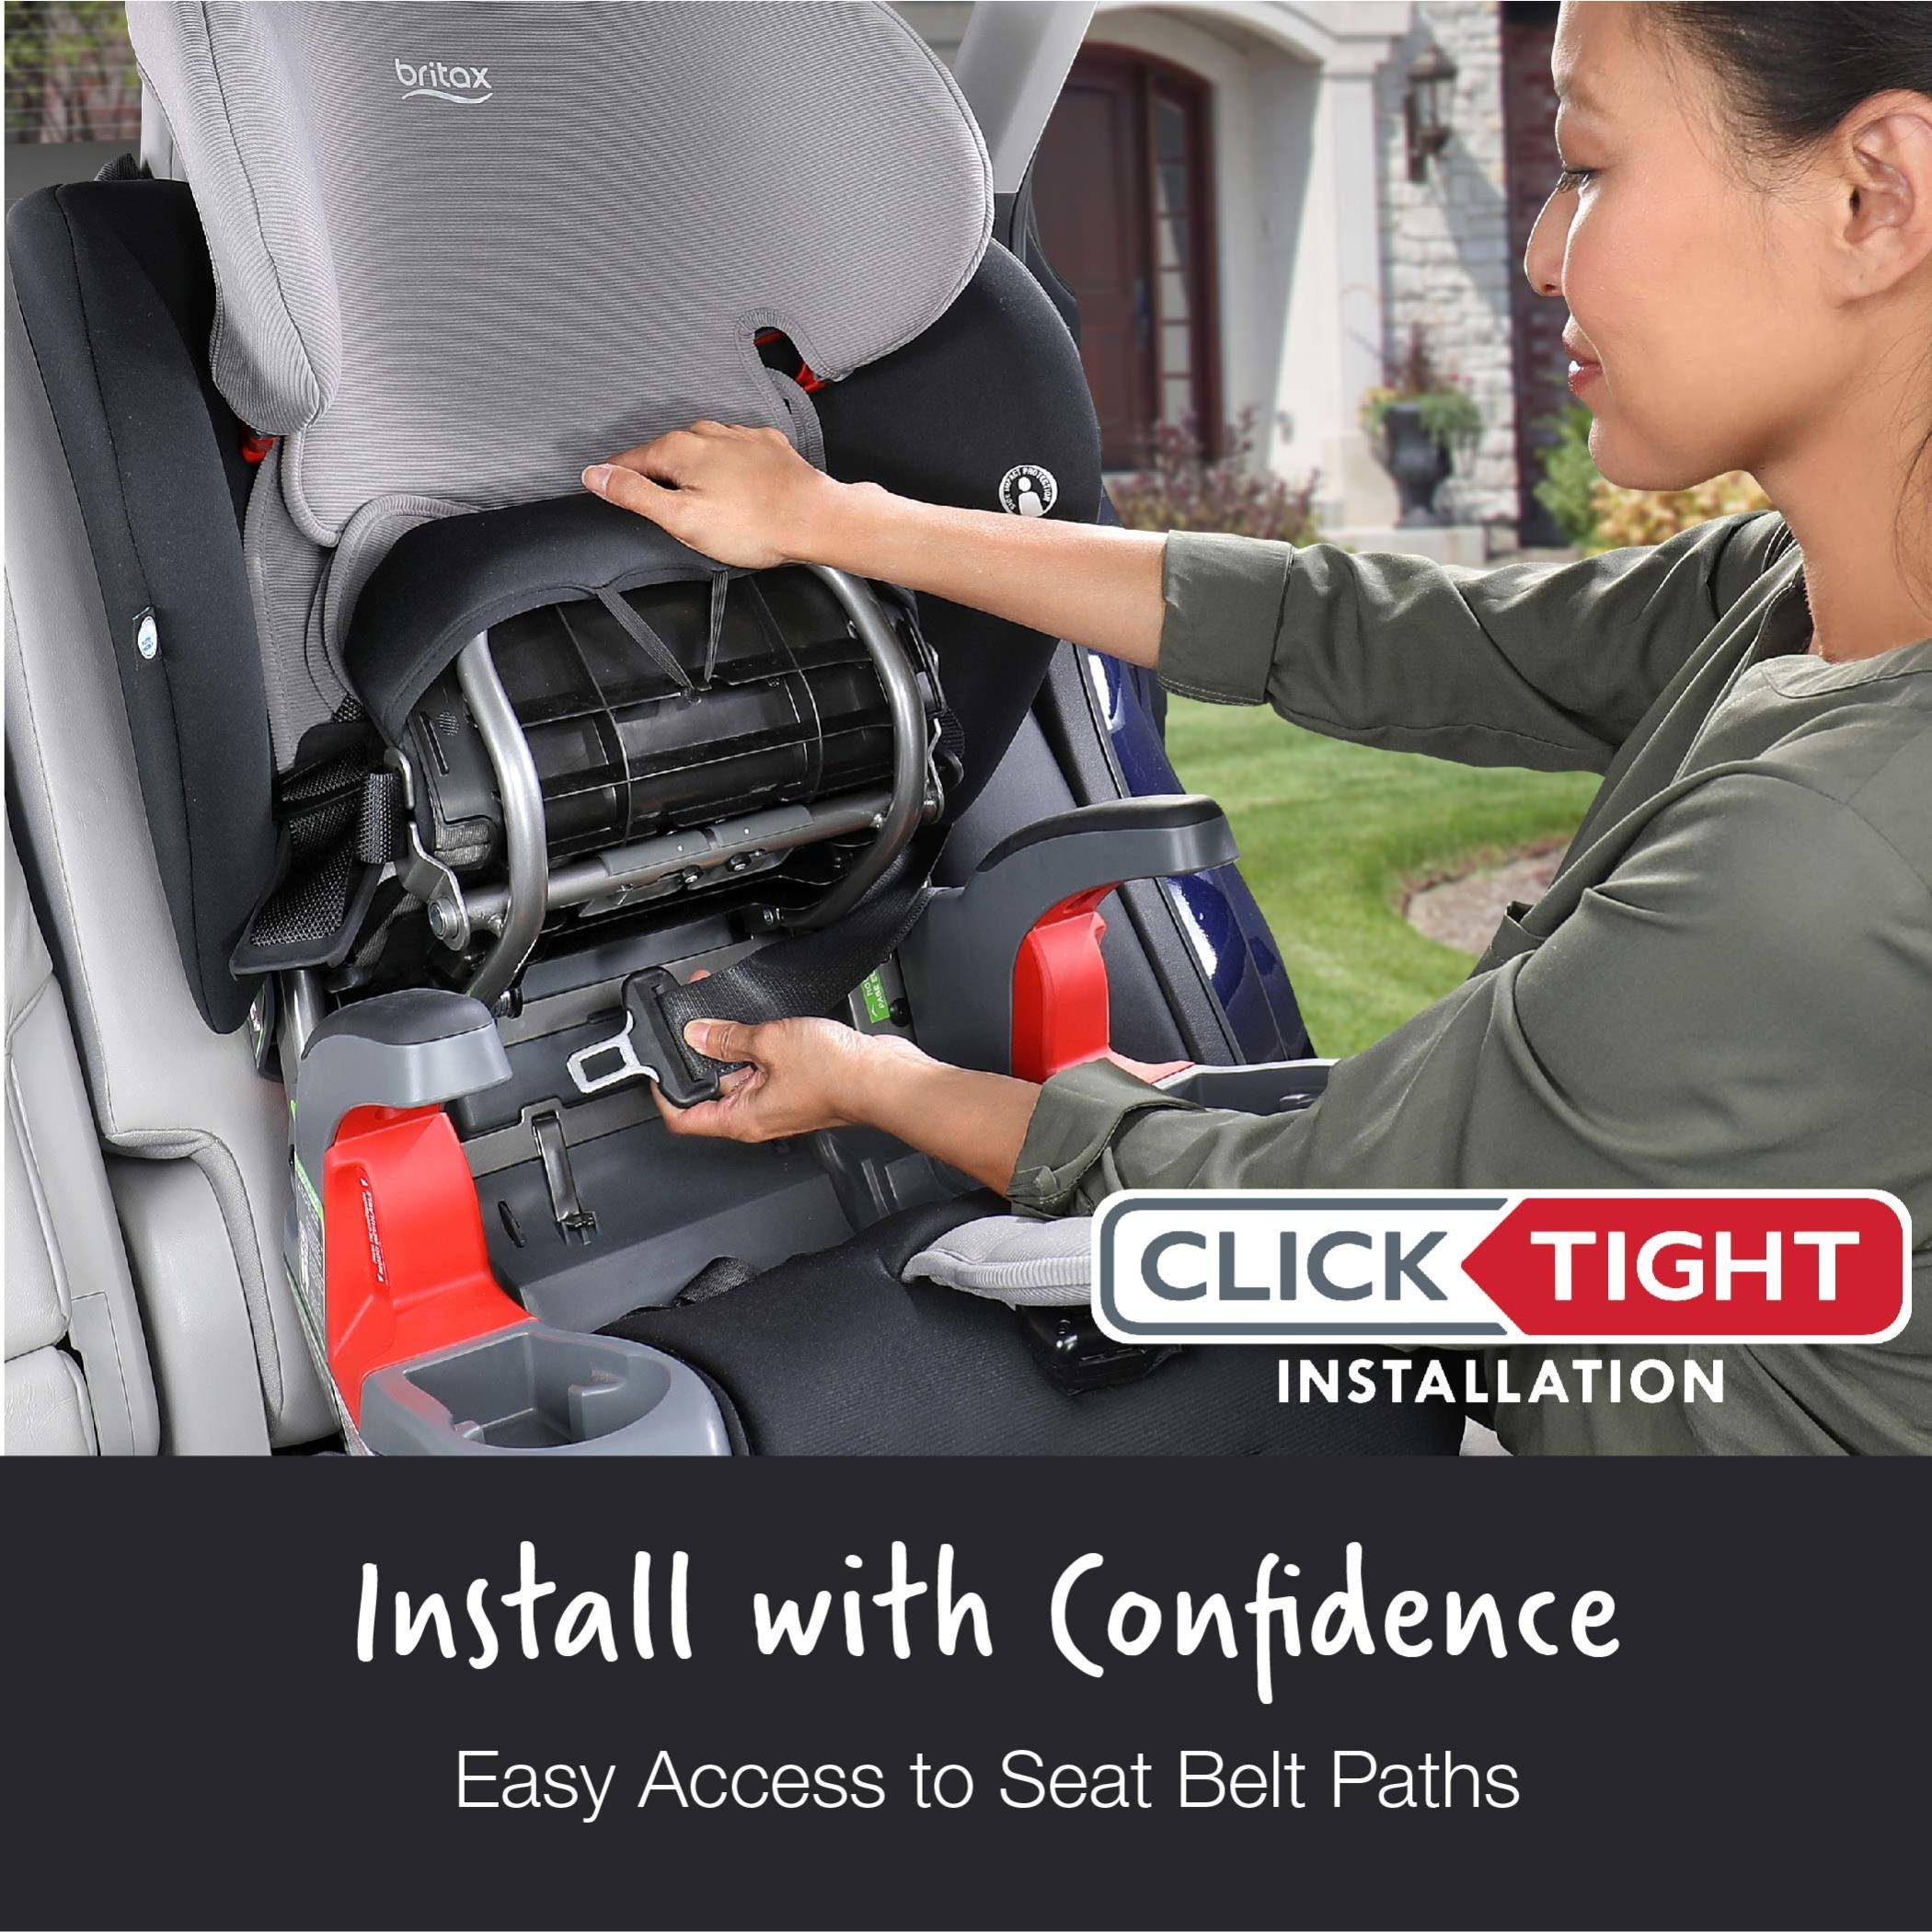 Mother Installing her Grow With You ClickTight Car Seat using ClickTight Installation